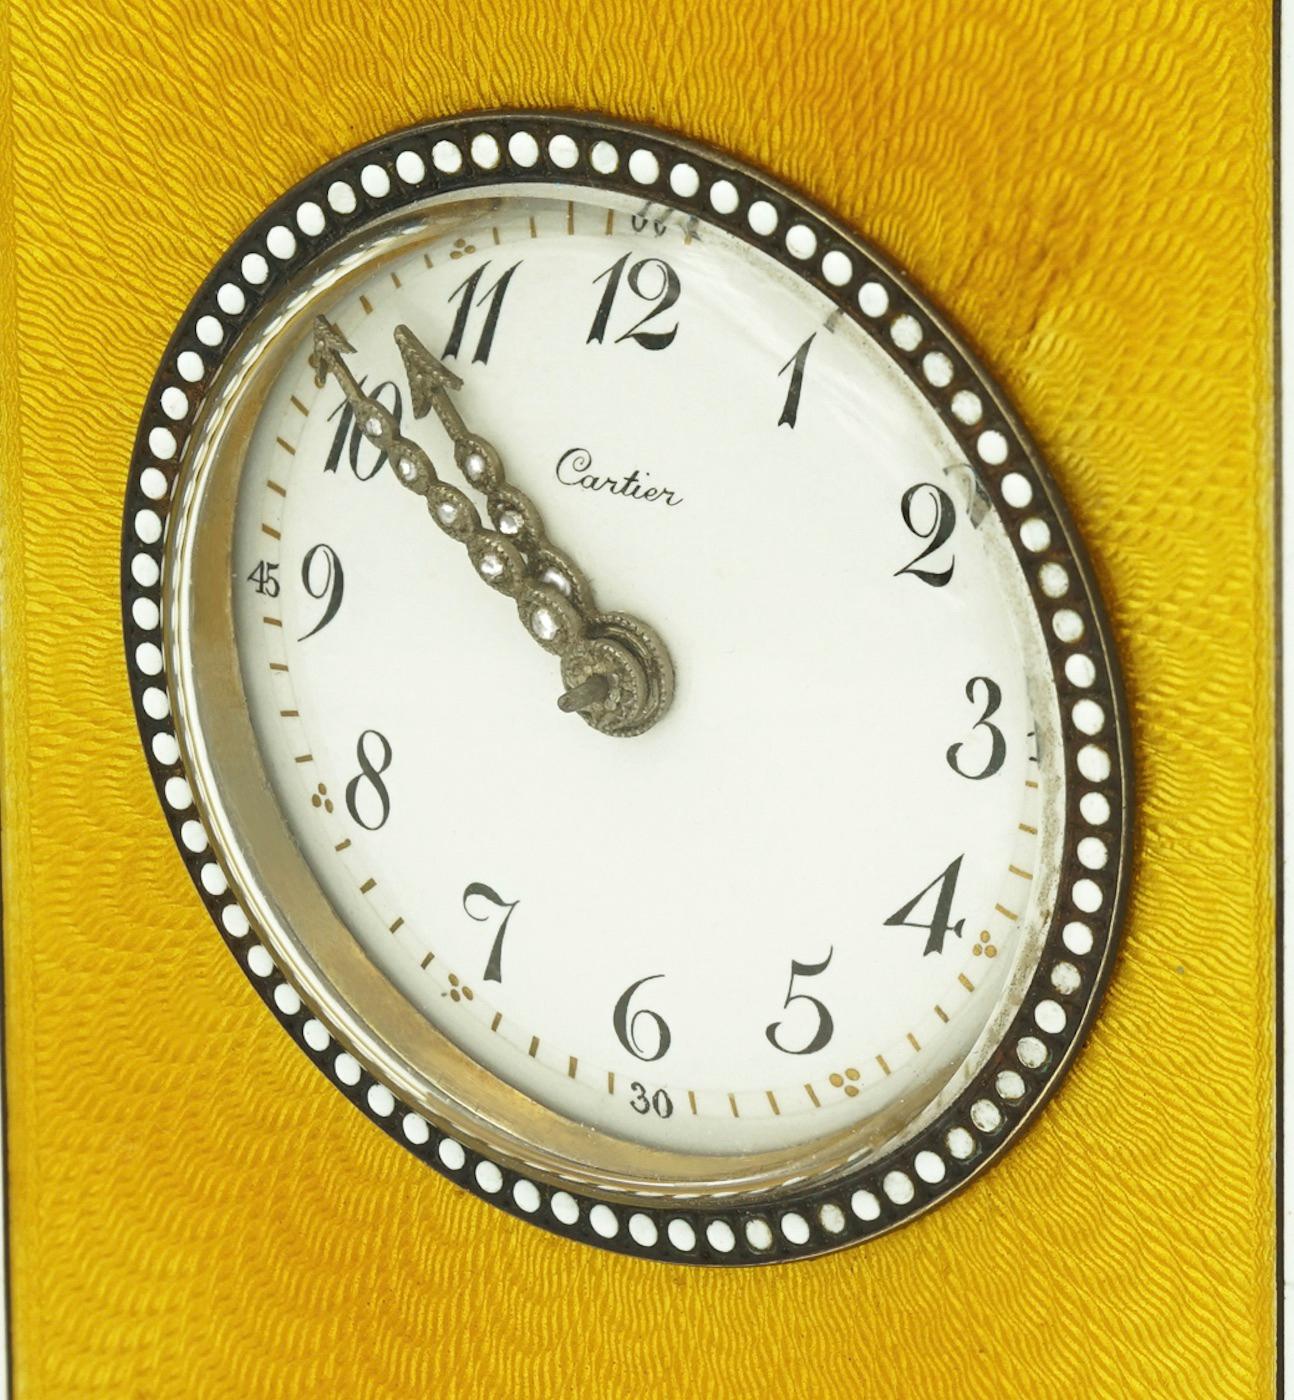 Cartier minute repeater clock, in yellow enamel, silver, agate and diamonds. 
Circa 1900-1905.

The dimensions are : hight 9,5 cm approximately include the button on the top.
Width 6,5 cm at the base
depth 5,5 cm at the base